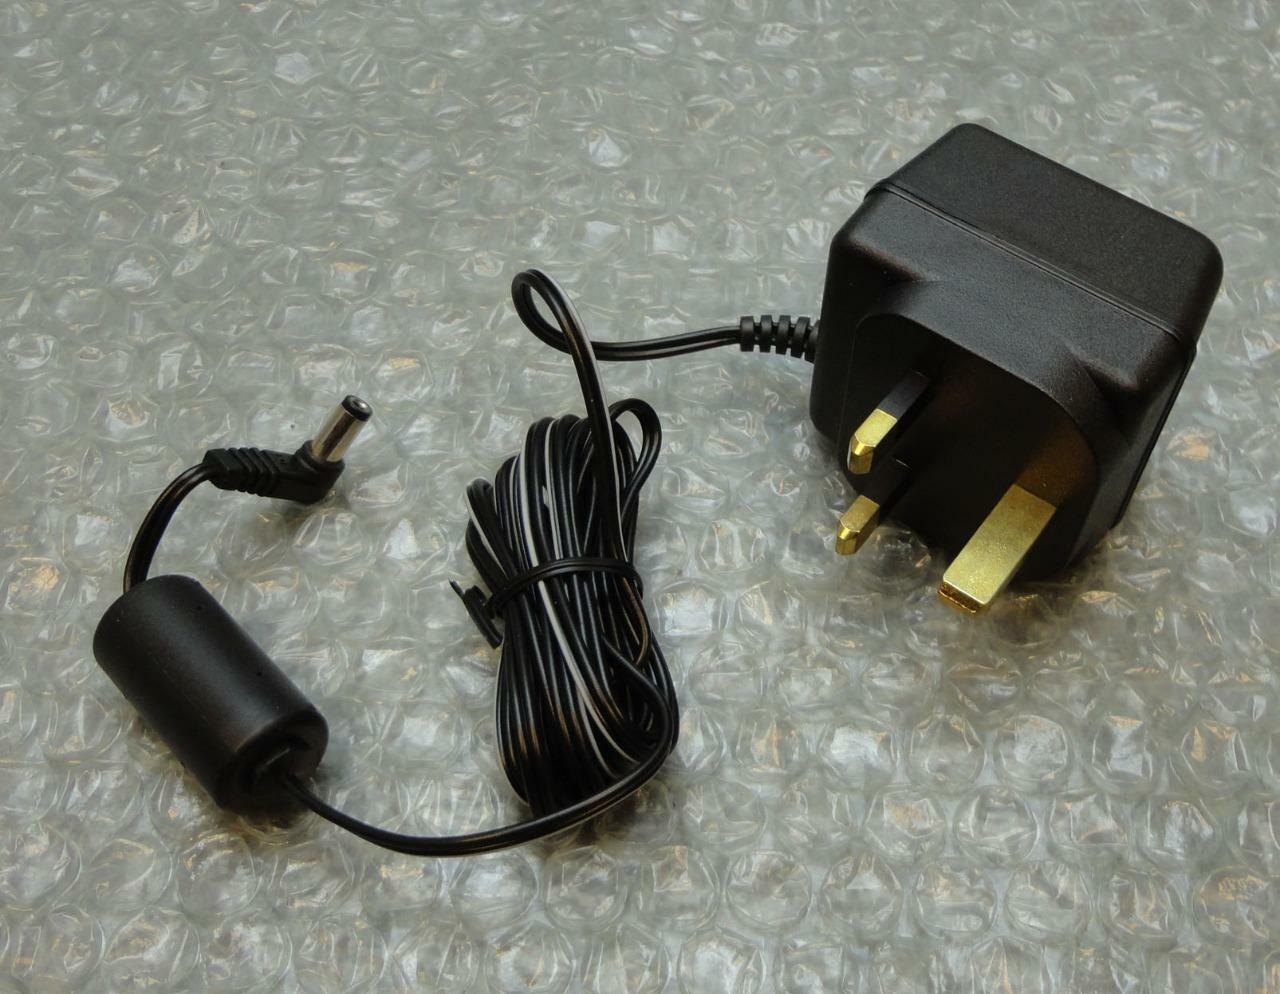 7.5V UK Mains AC-DC Adaptor Power Supply for Roberts Elise or Classic Dab Radio MPN: M4-47588 EAN: 766343 Type: Po